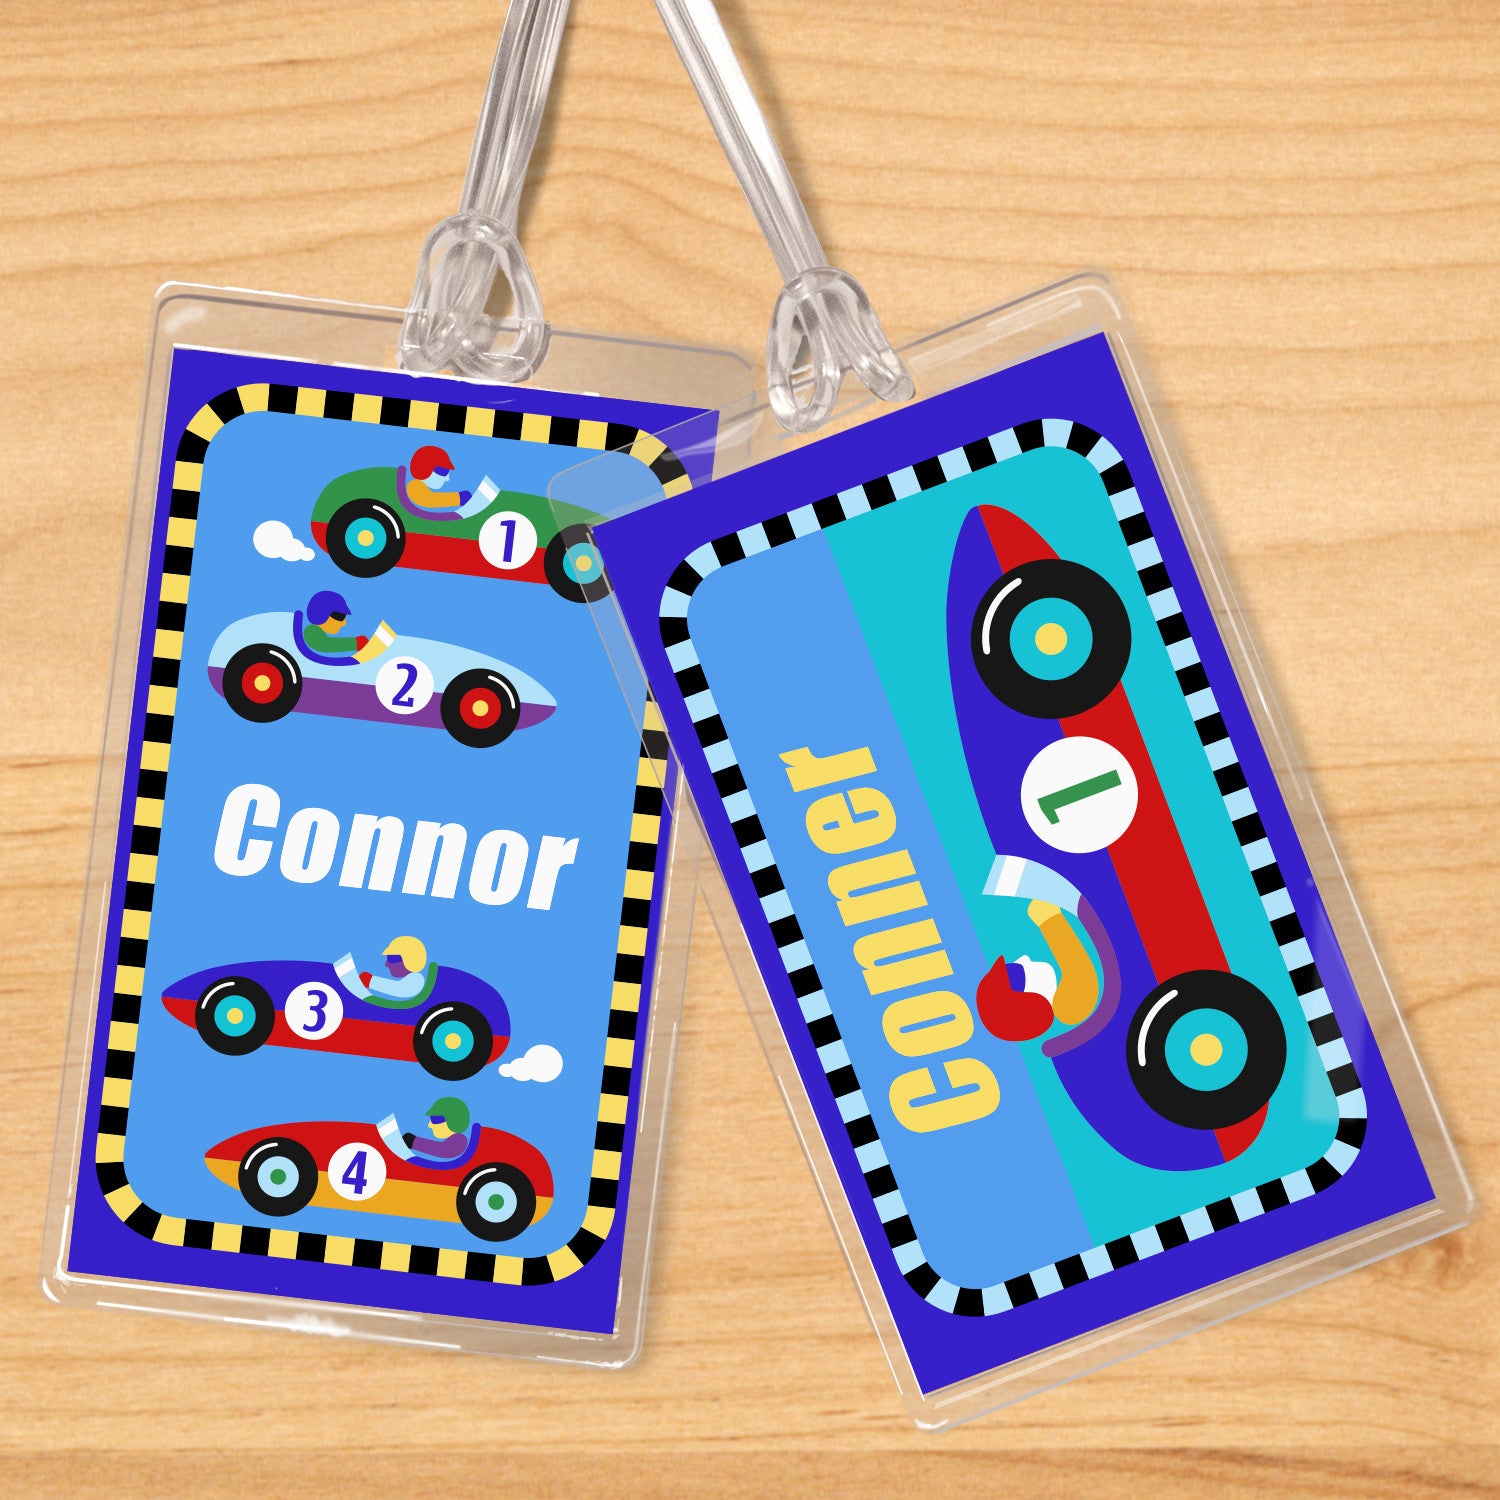 Free Customized Name Tags Printable For School